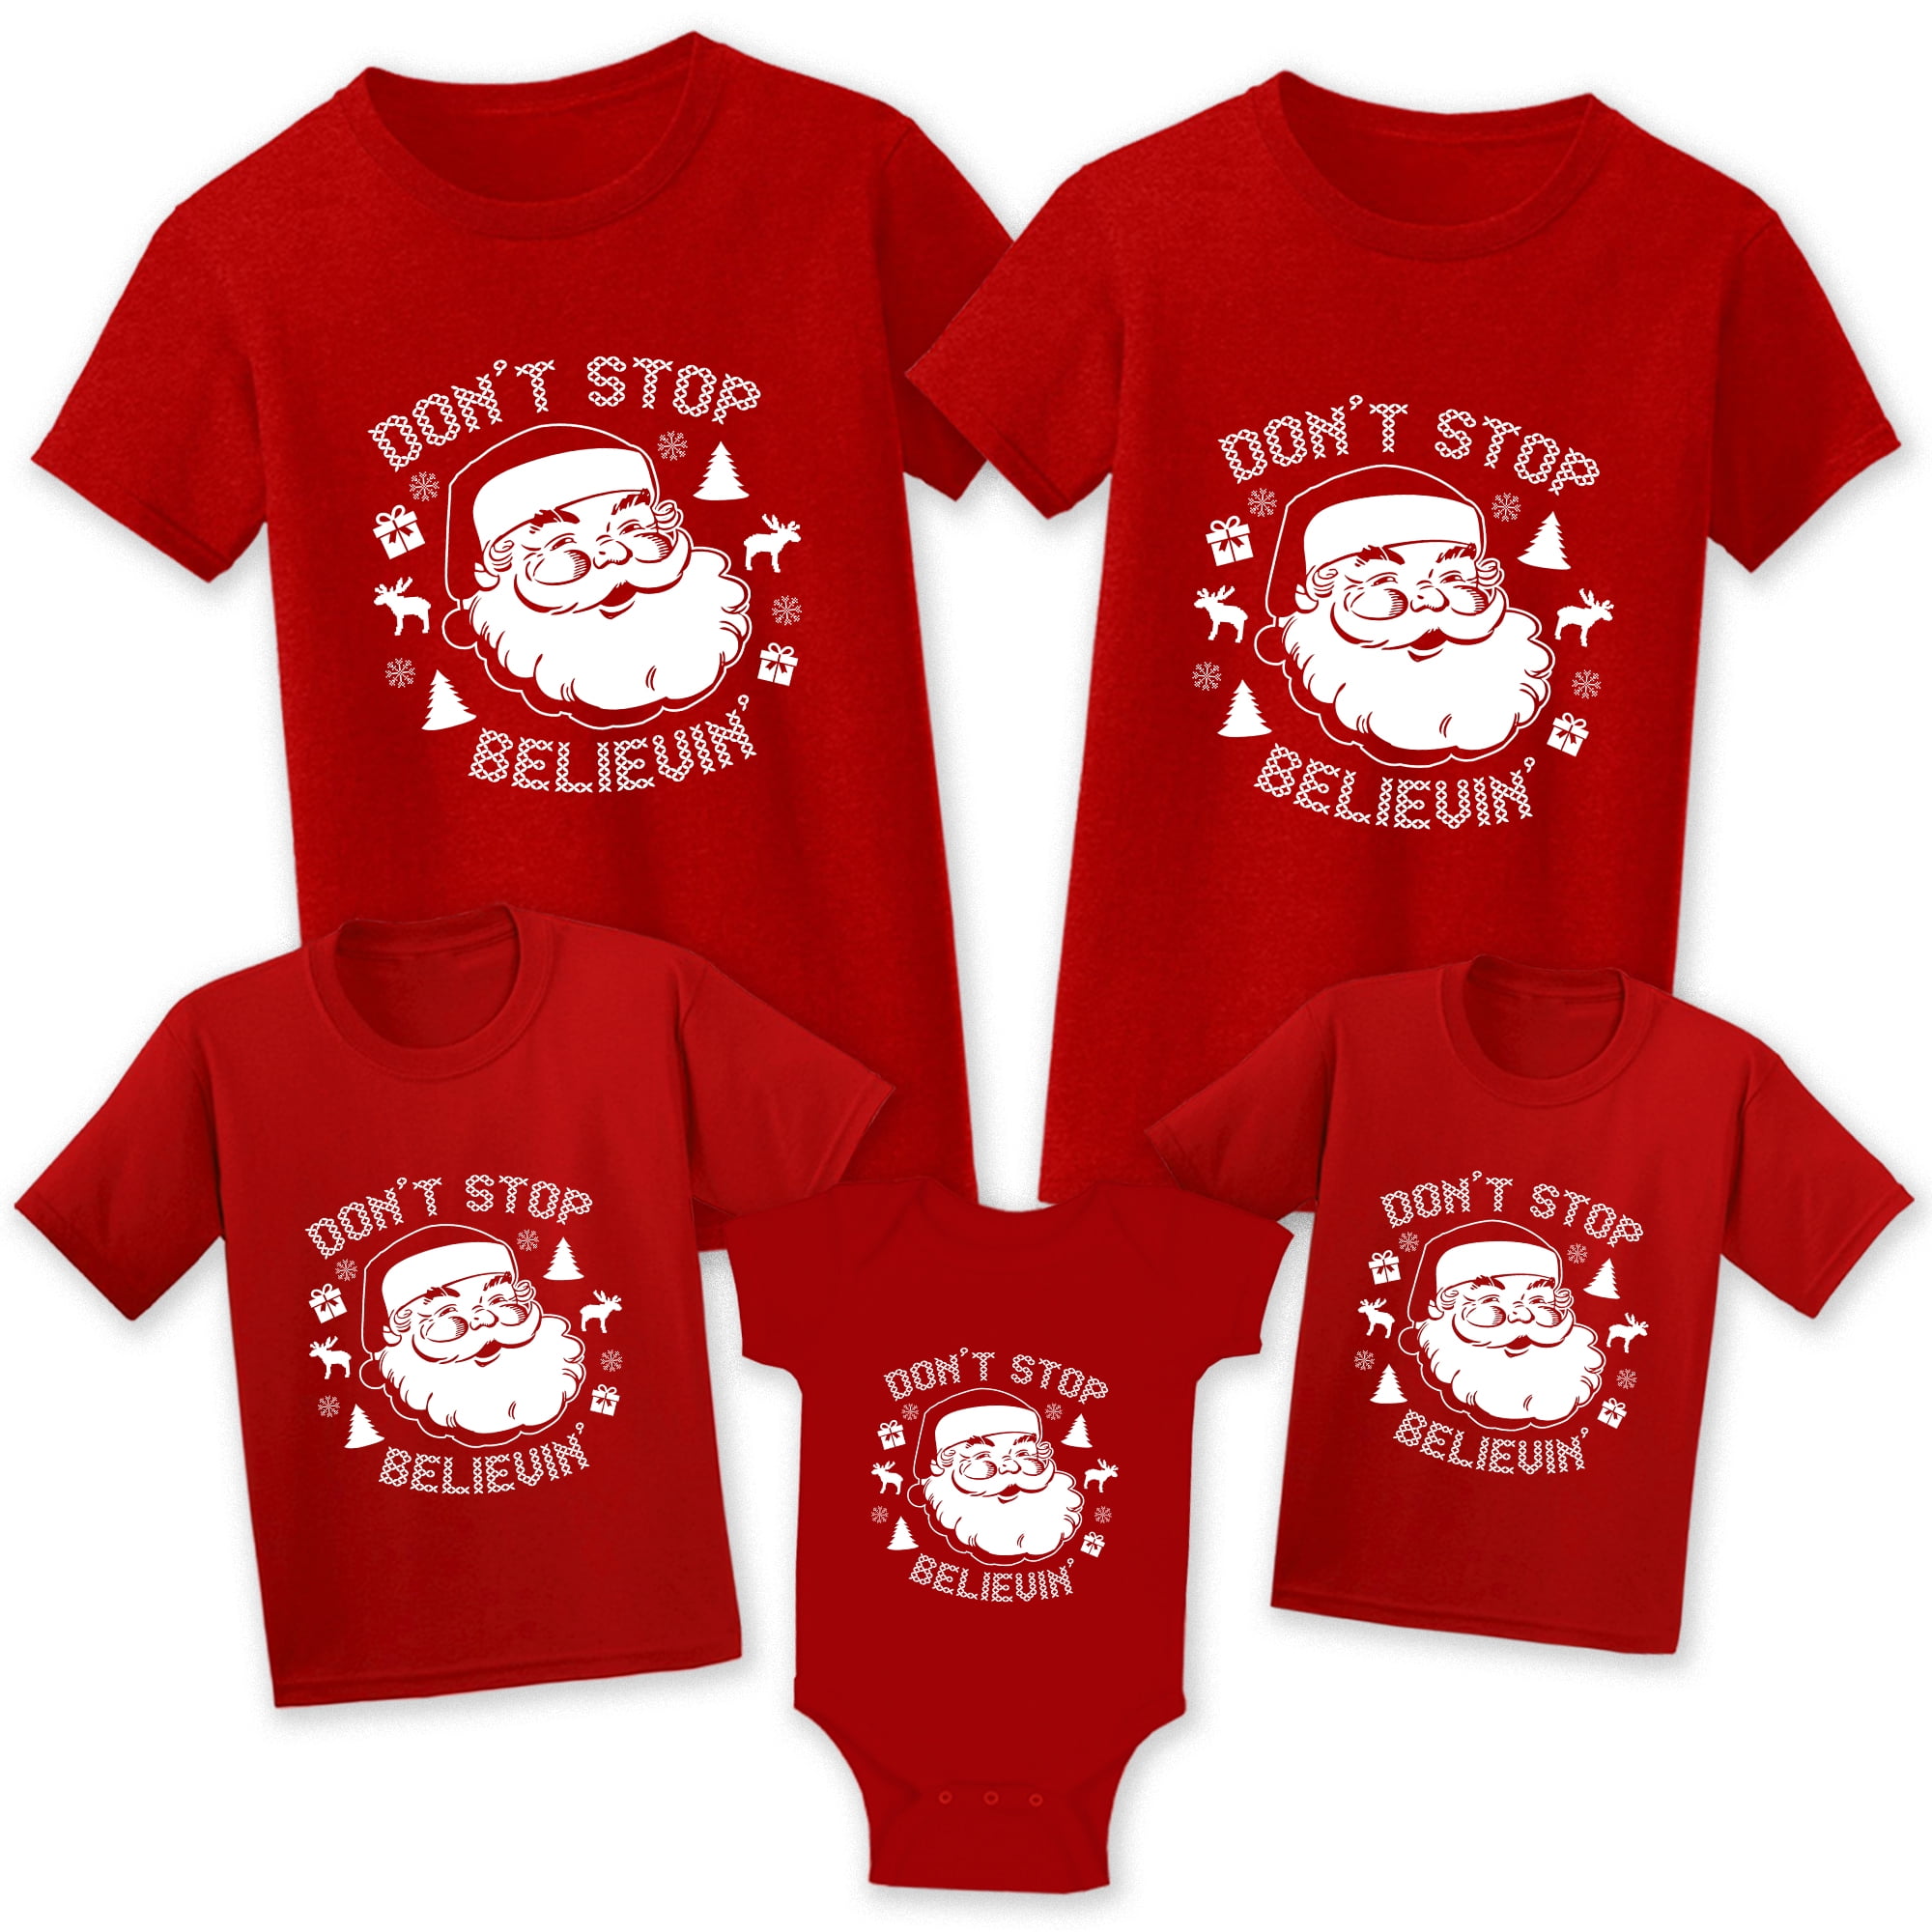 Funny Kid women Christmas shirt boy Christmas graphic tee Holiday shirt for women cute Christmas tee for women Clothing Gender-Neutral Adult Clothing Tops & Tees T-shirts Graphic Tees xmas shirt for family 